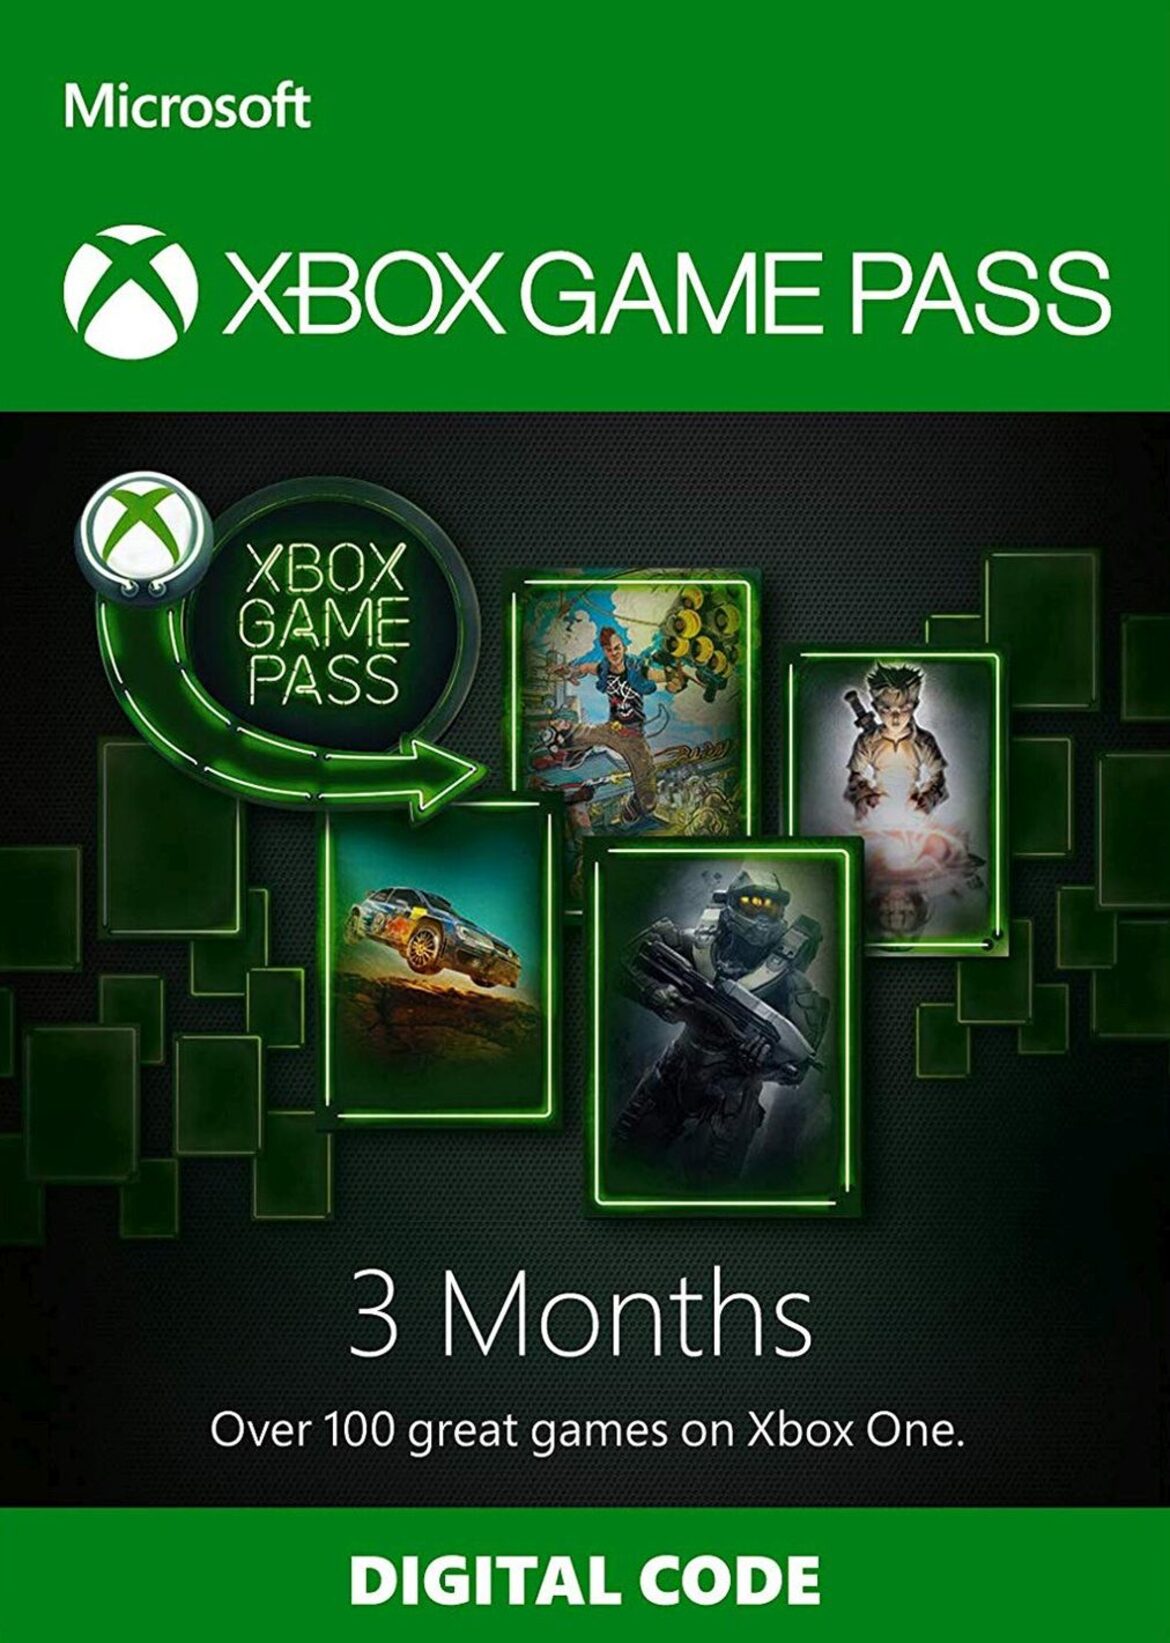 Xbox Game Pass Ultimate 14 Days Trial Buy Cheaper Eneba